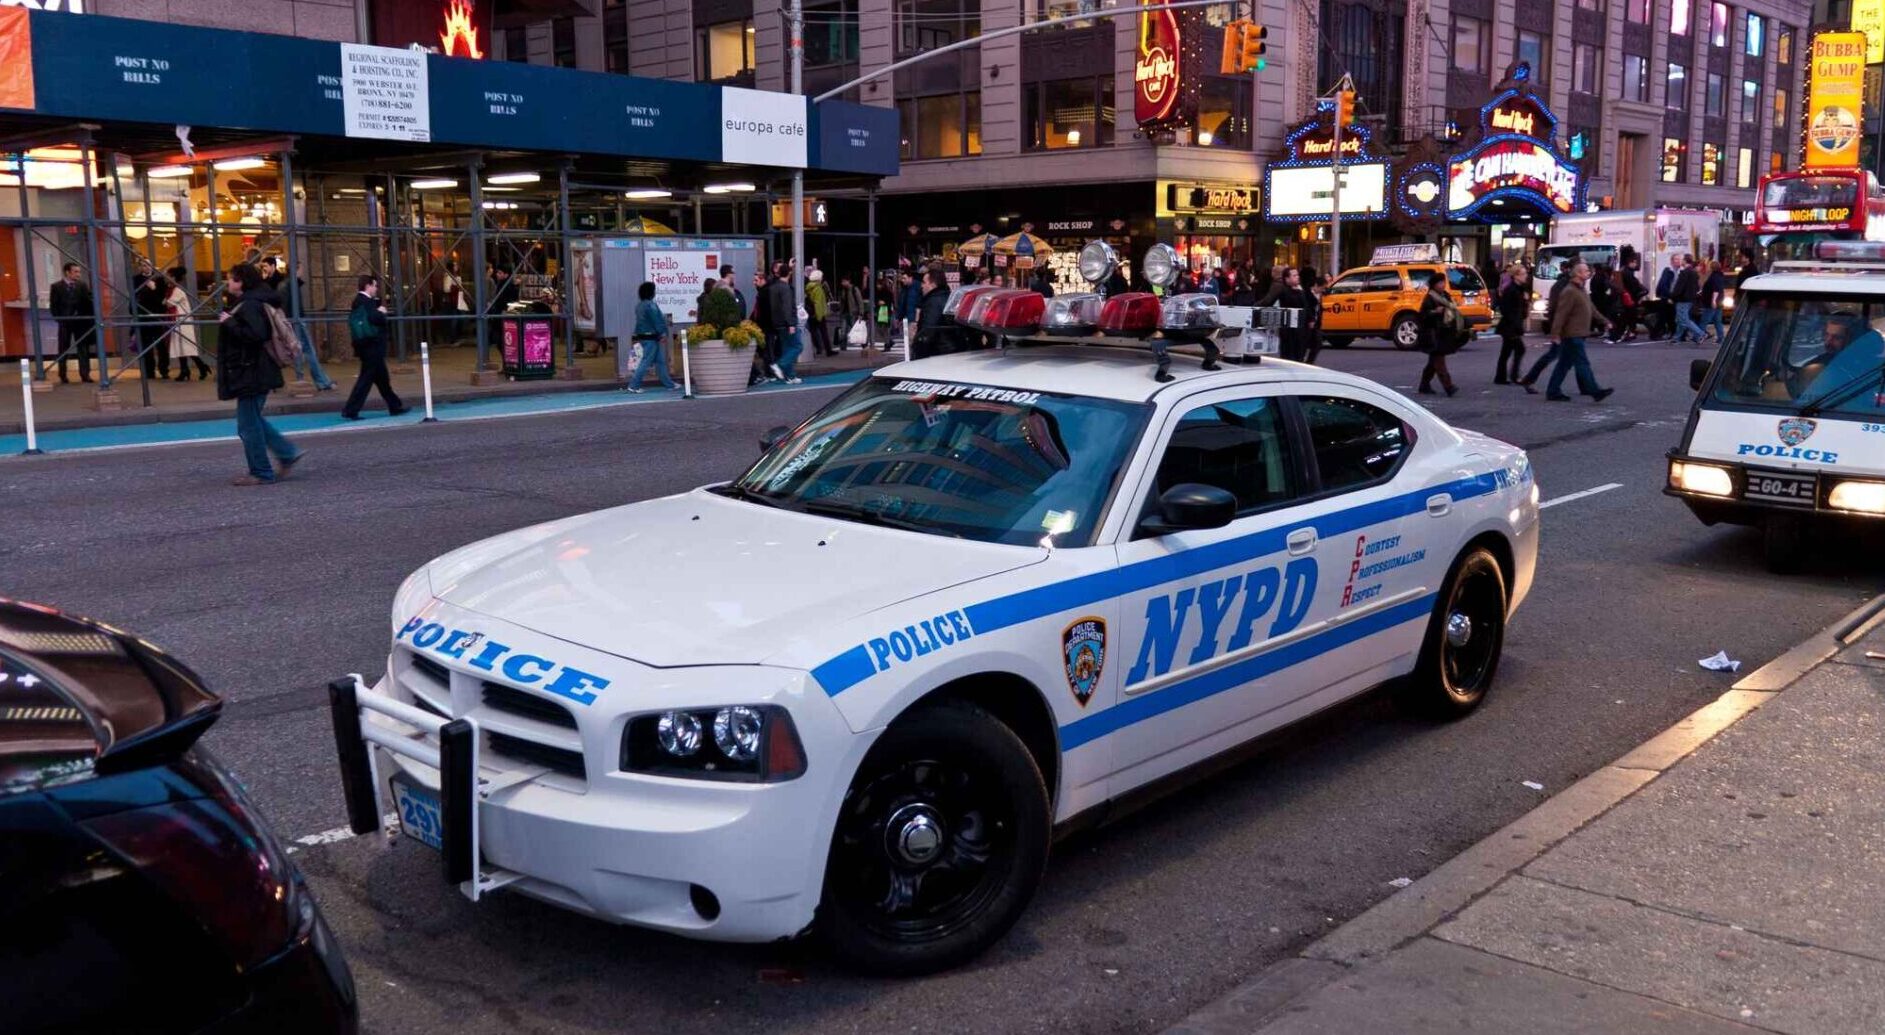 NYPD systems